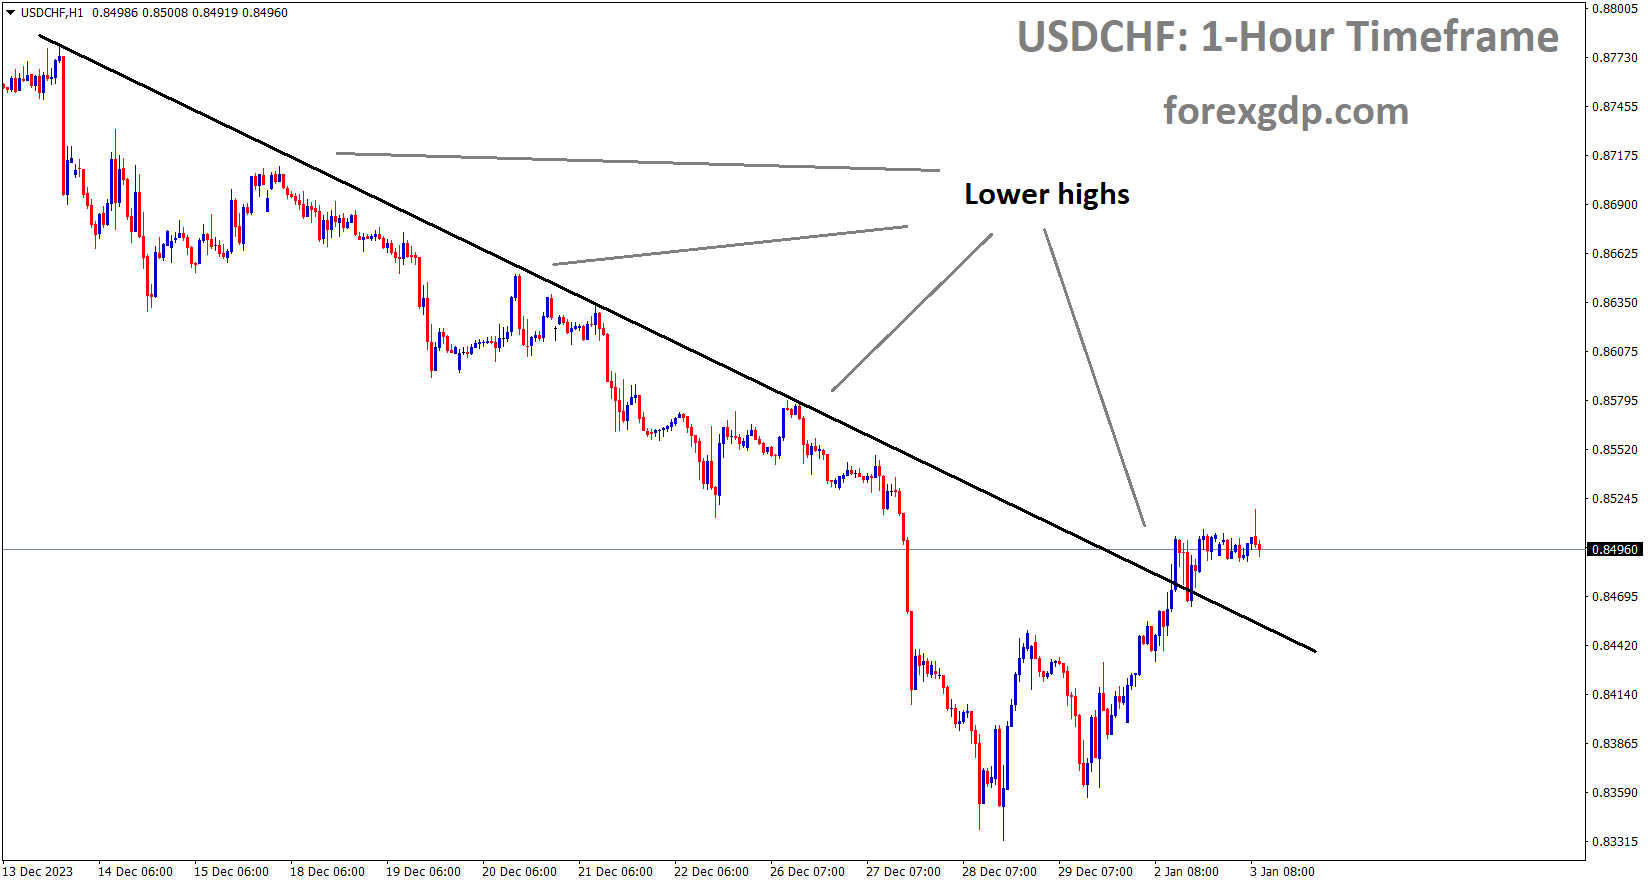 USDCHF is moving in the Downtrend line and the market has reached the lower high area of the trend line